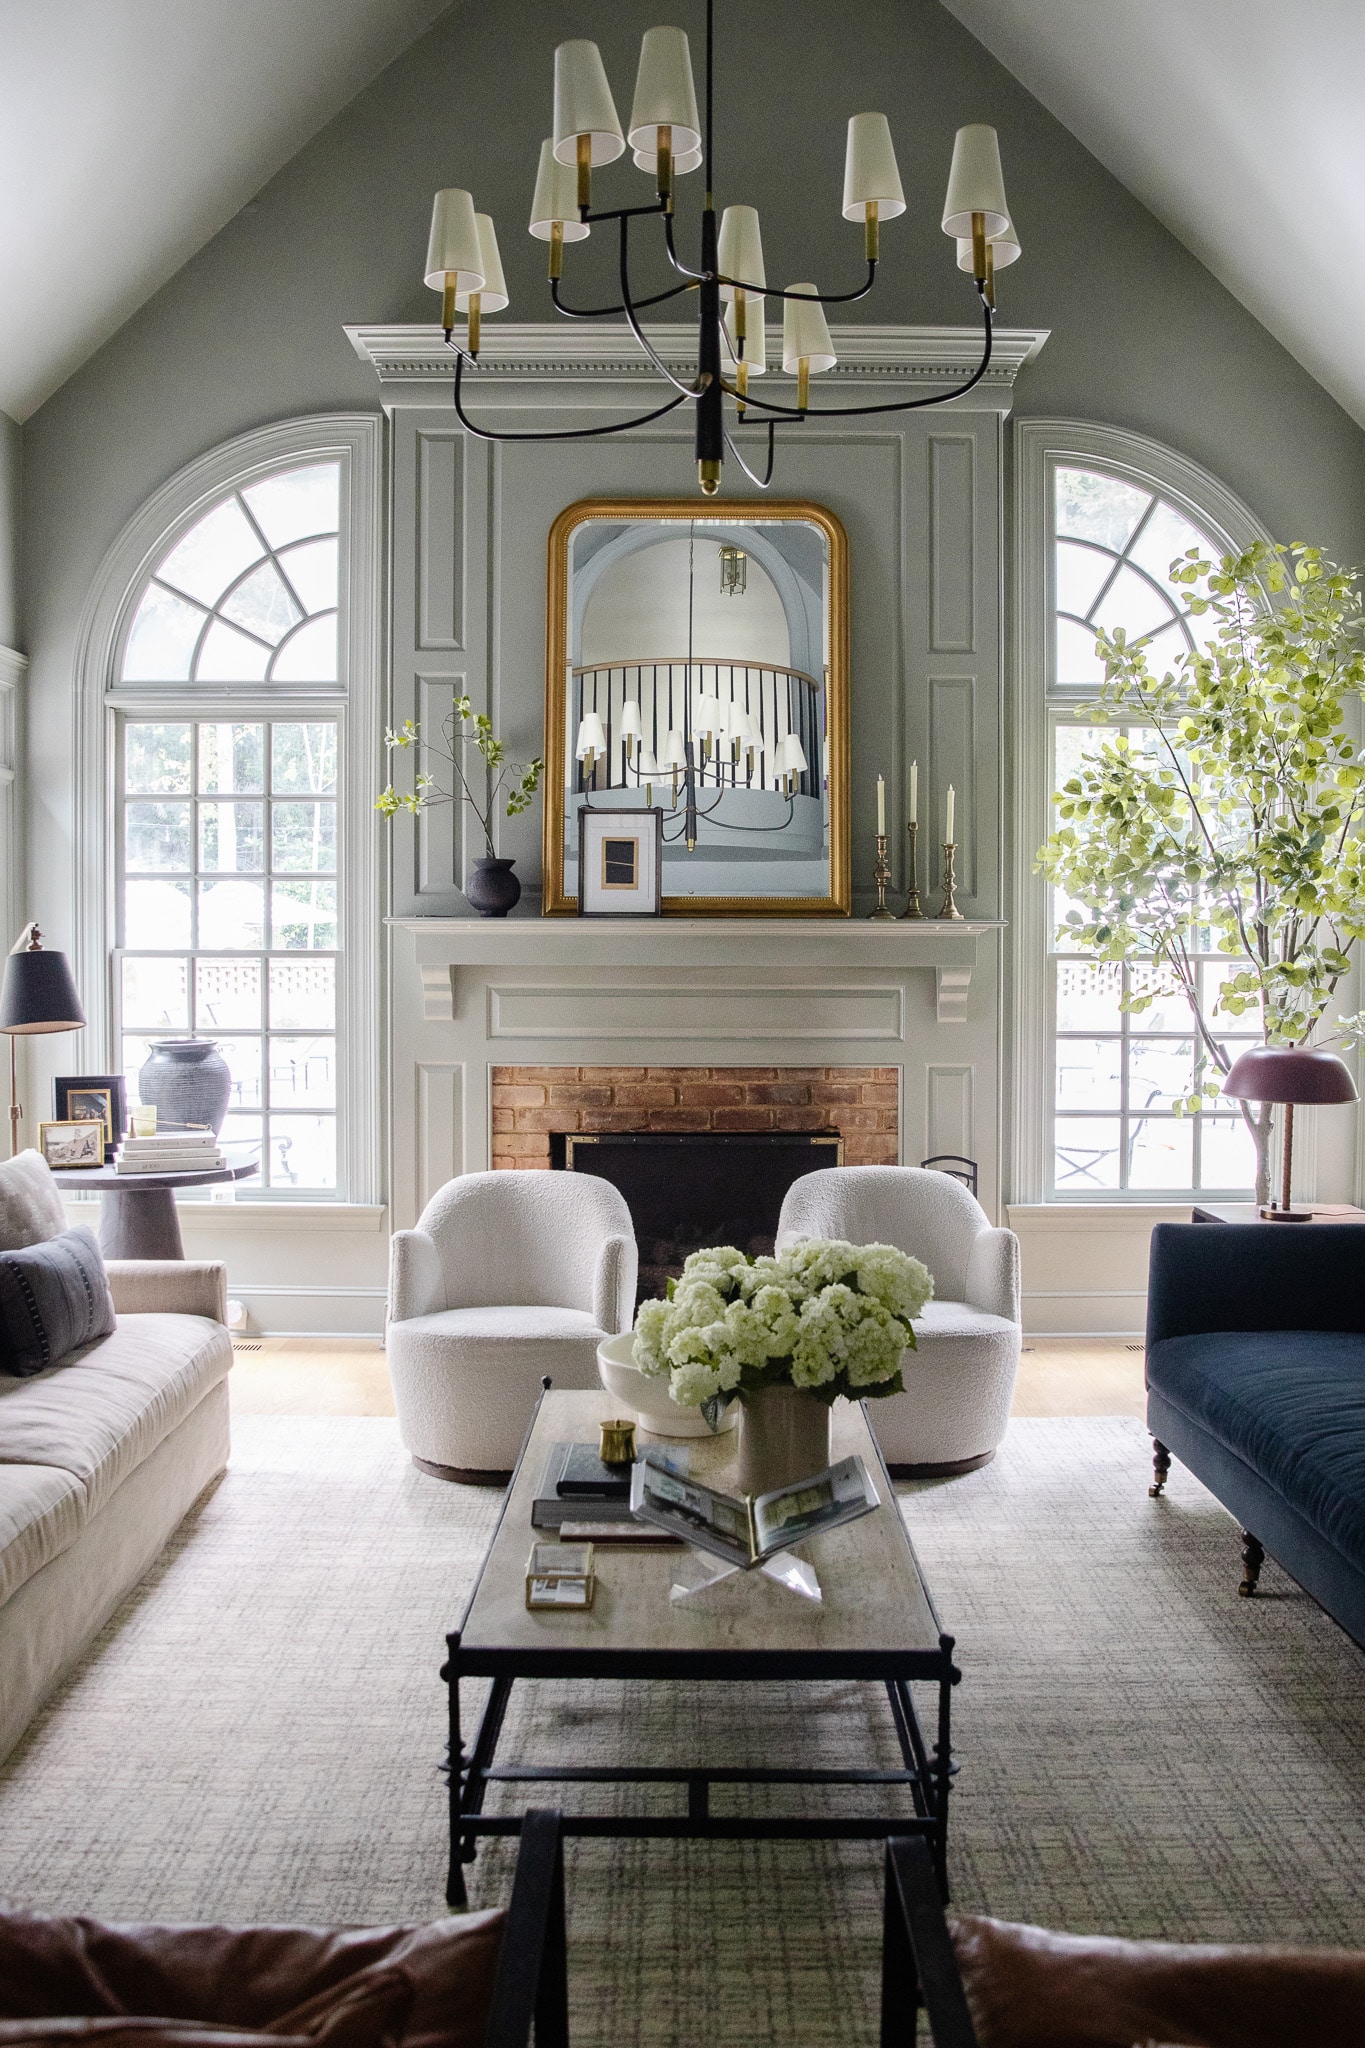 Chris Loves Julia | The living room with original white arched windows flanking the fireplace